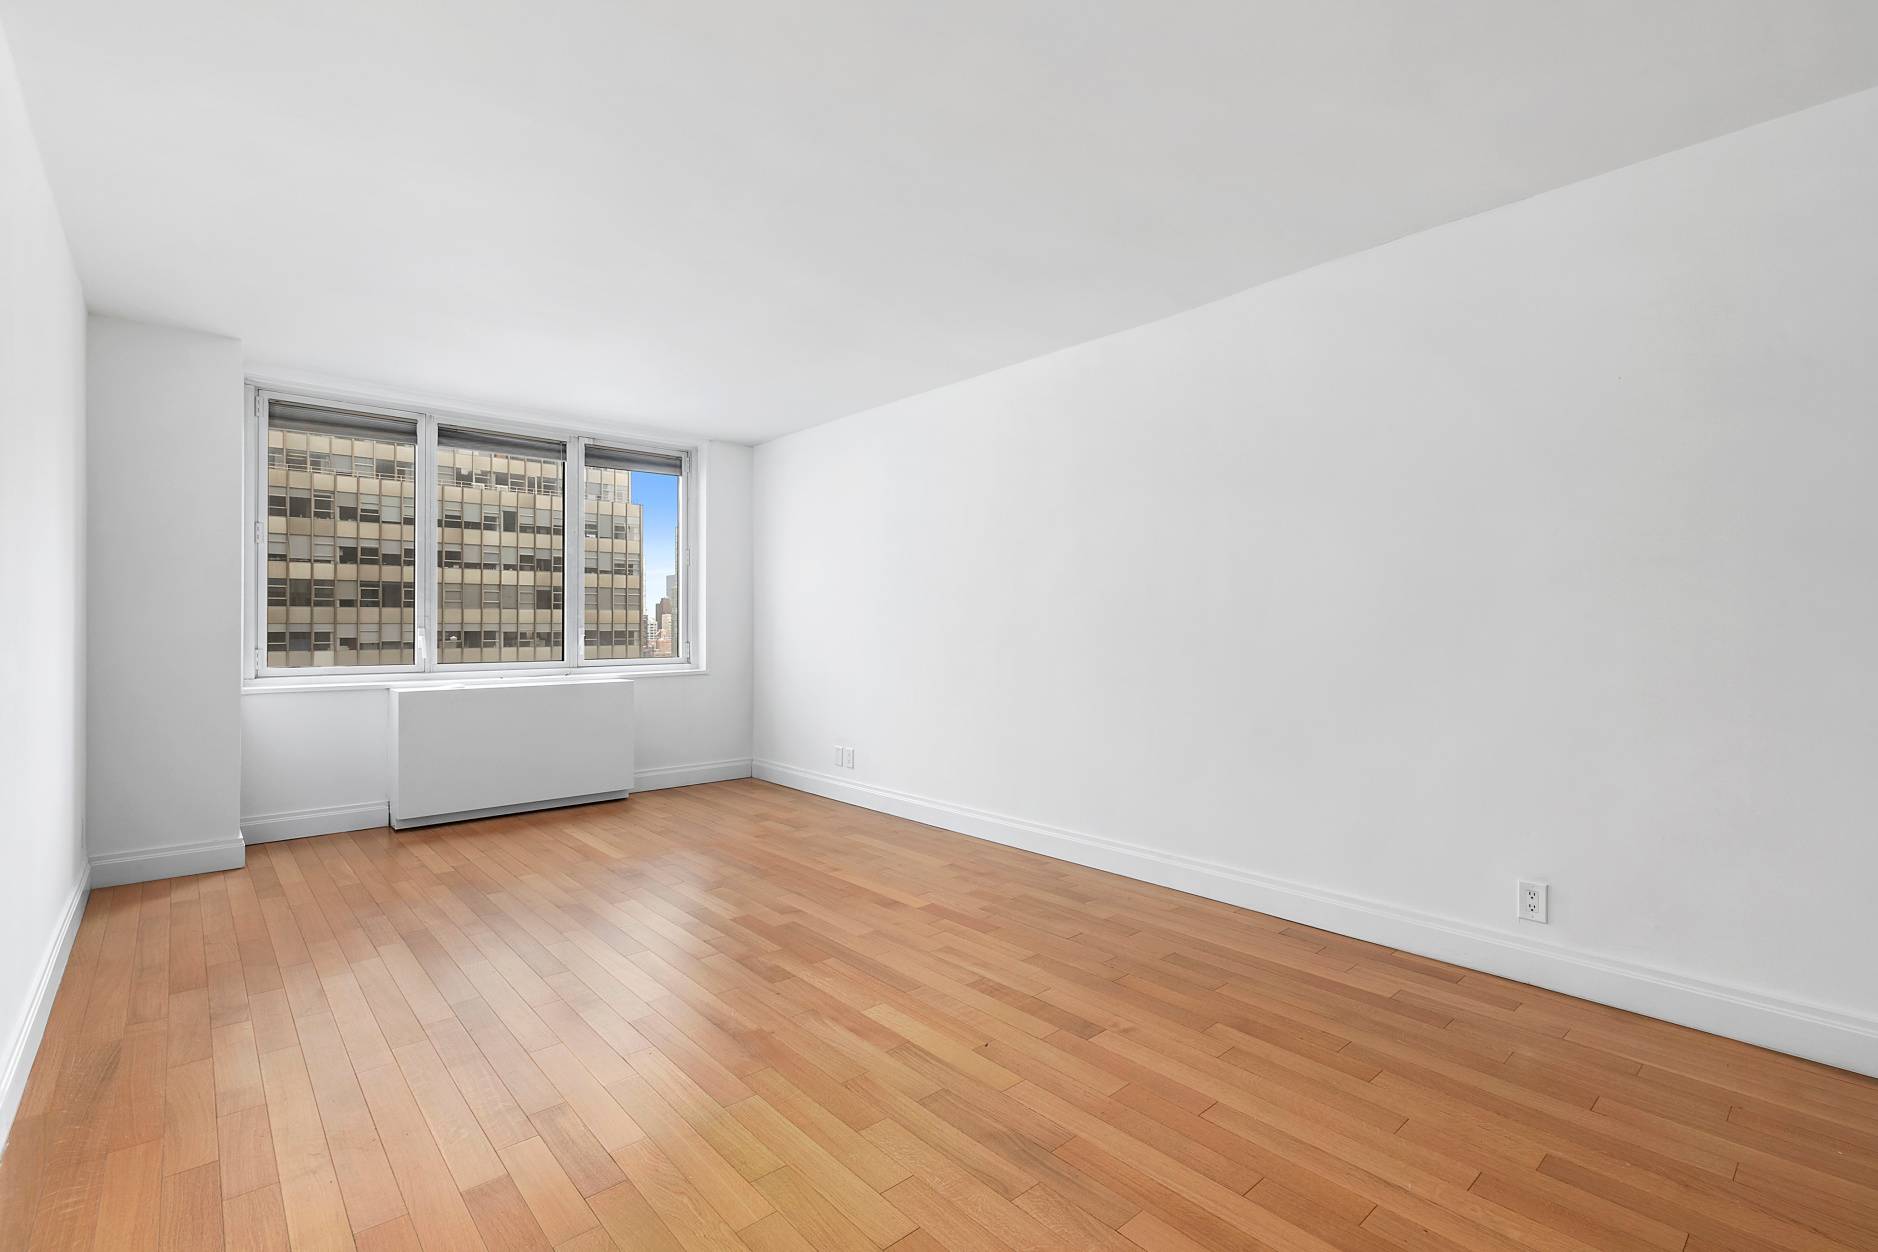 212 East 47th Street is a luxury full service condo building in Turtle Bay and the A line is one of the most sought after lines because of the separate ...